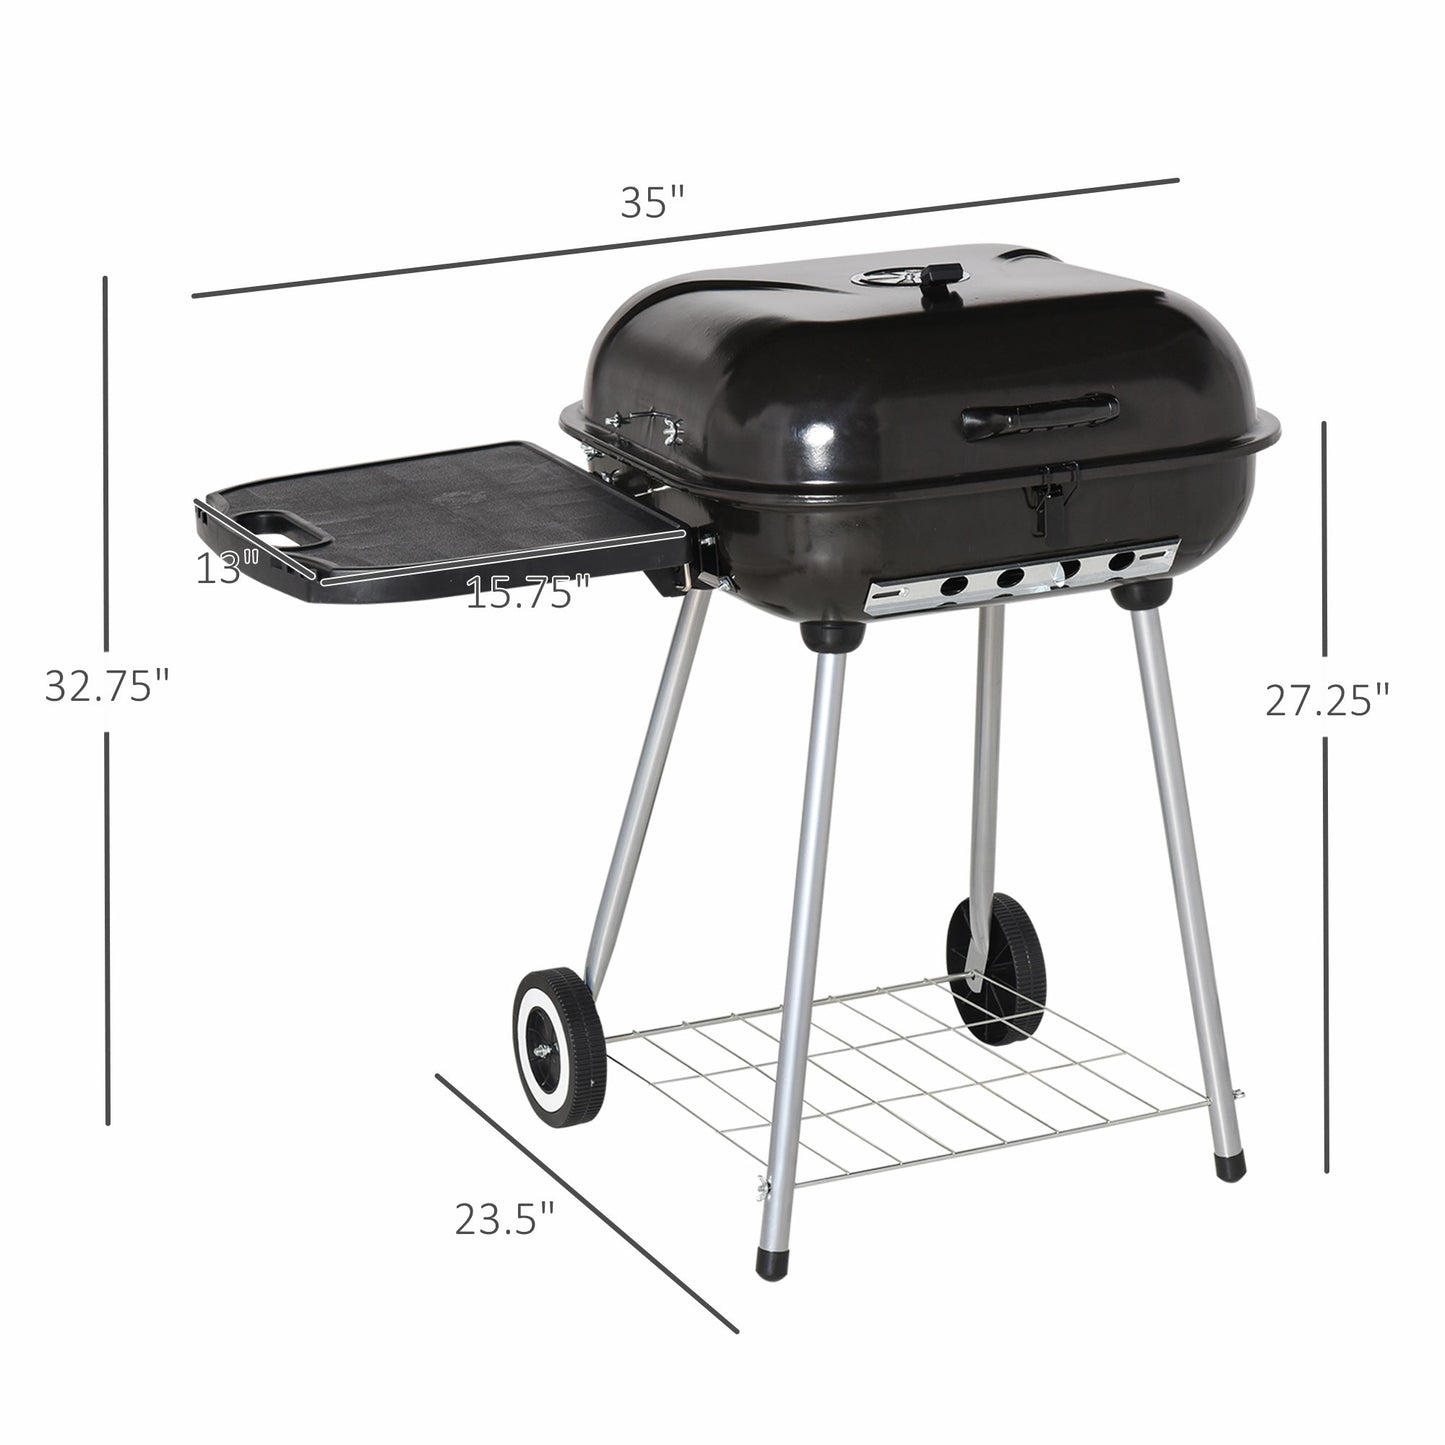 Outdoor and Garden-22" Charcoal Barbecue Grill with Portable Wheel, Side Tray and Lower Shelf for Outdoor BBQ for Garden, Backyard, Poolside - Outdoor Style Company